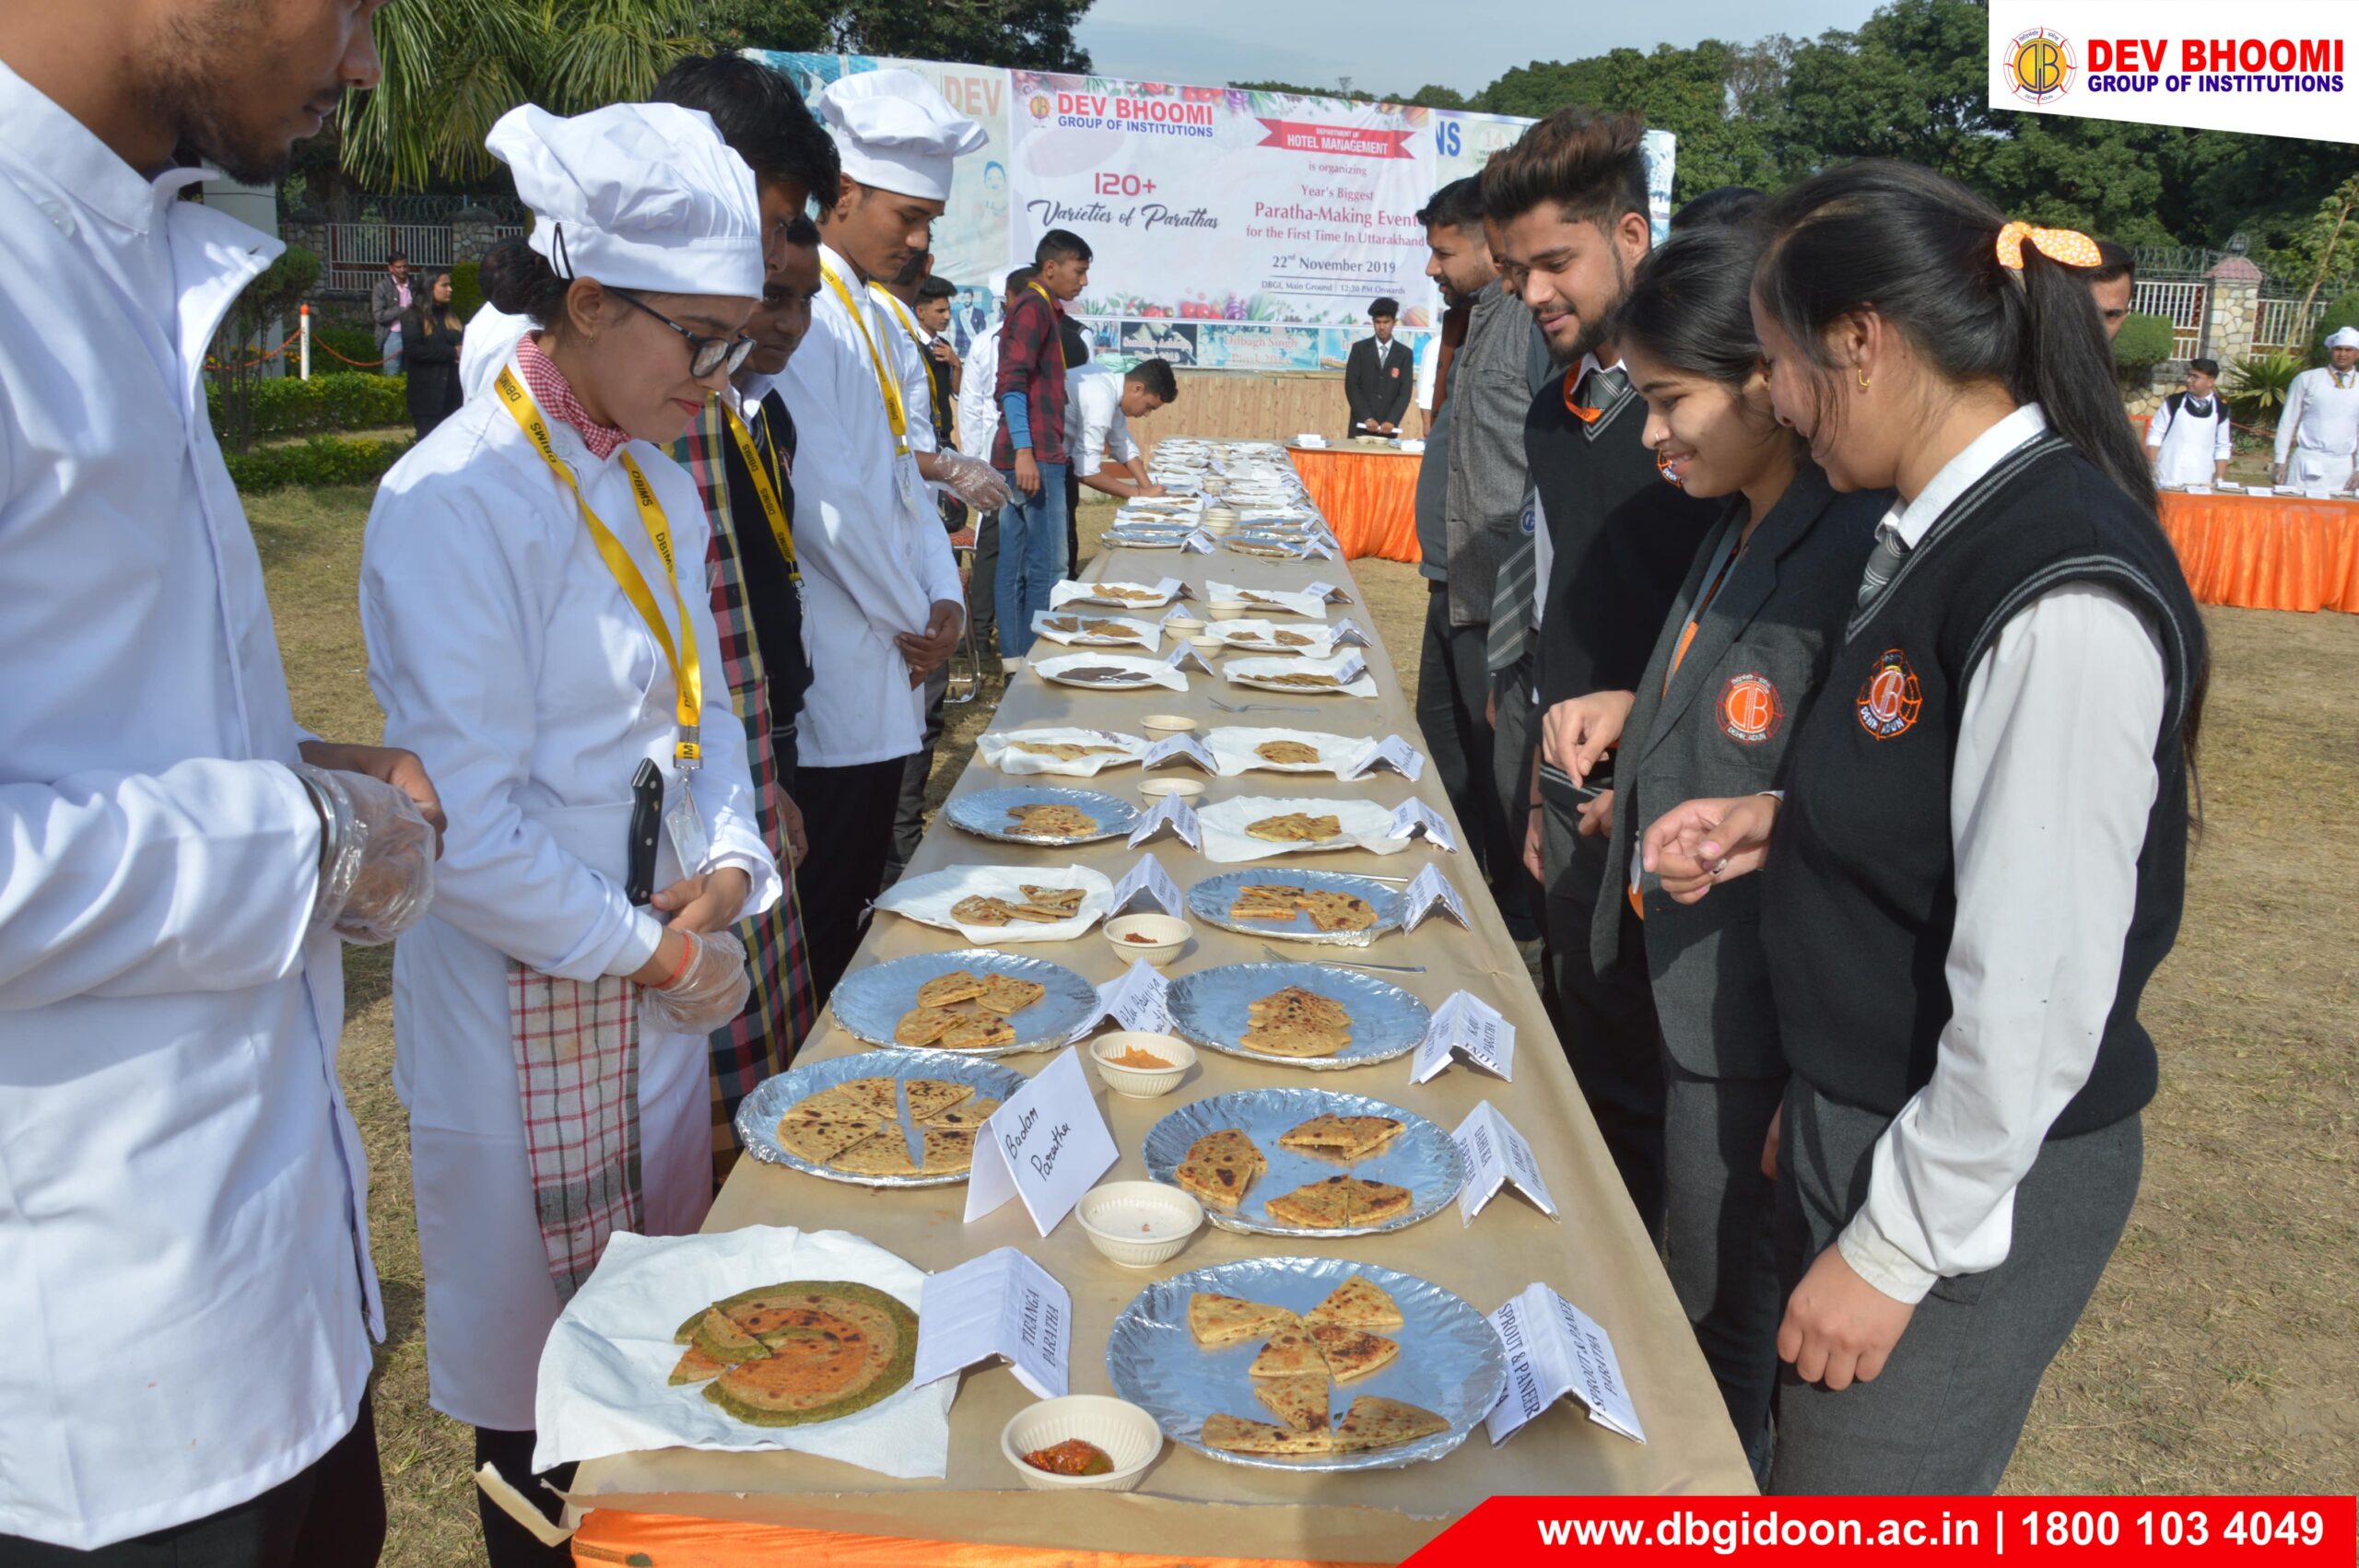 Photos- 120+ Varieties of Paratha Making Event in Department of Hotel Management